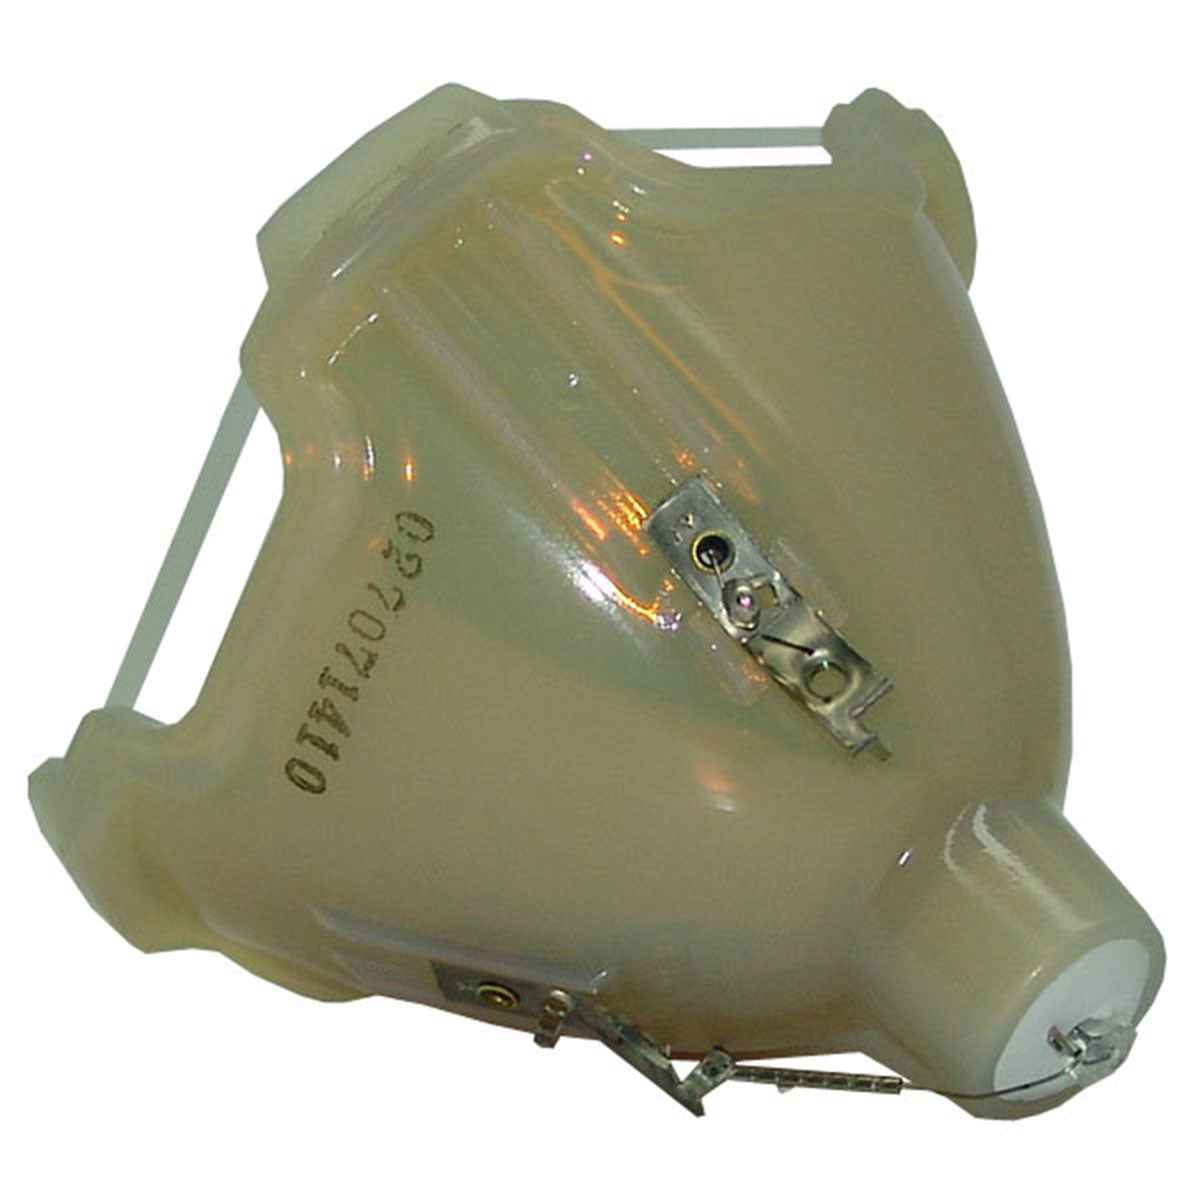 Christie 03-000712-01 Philips Projector Bare Lamp